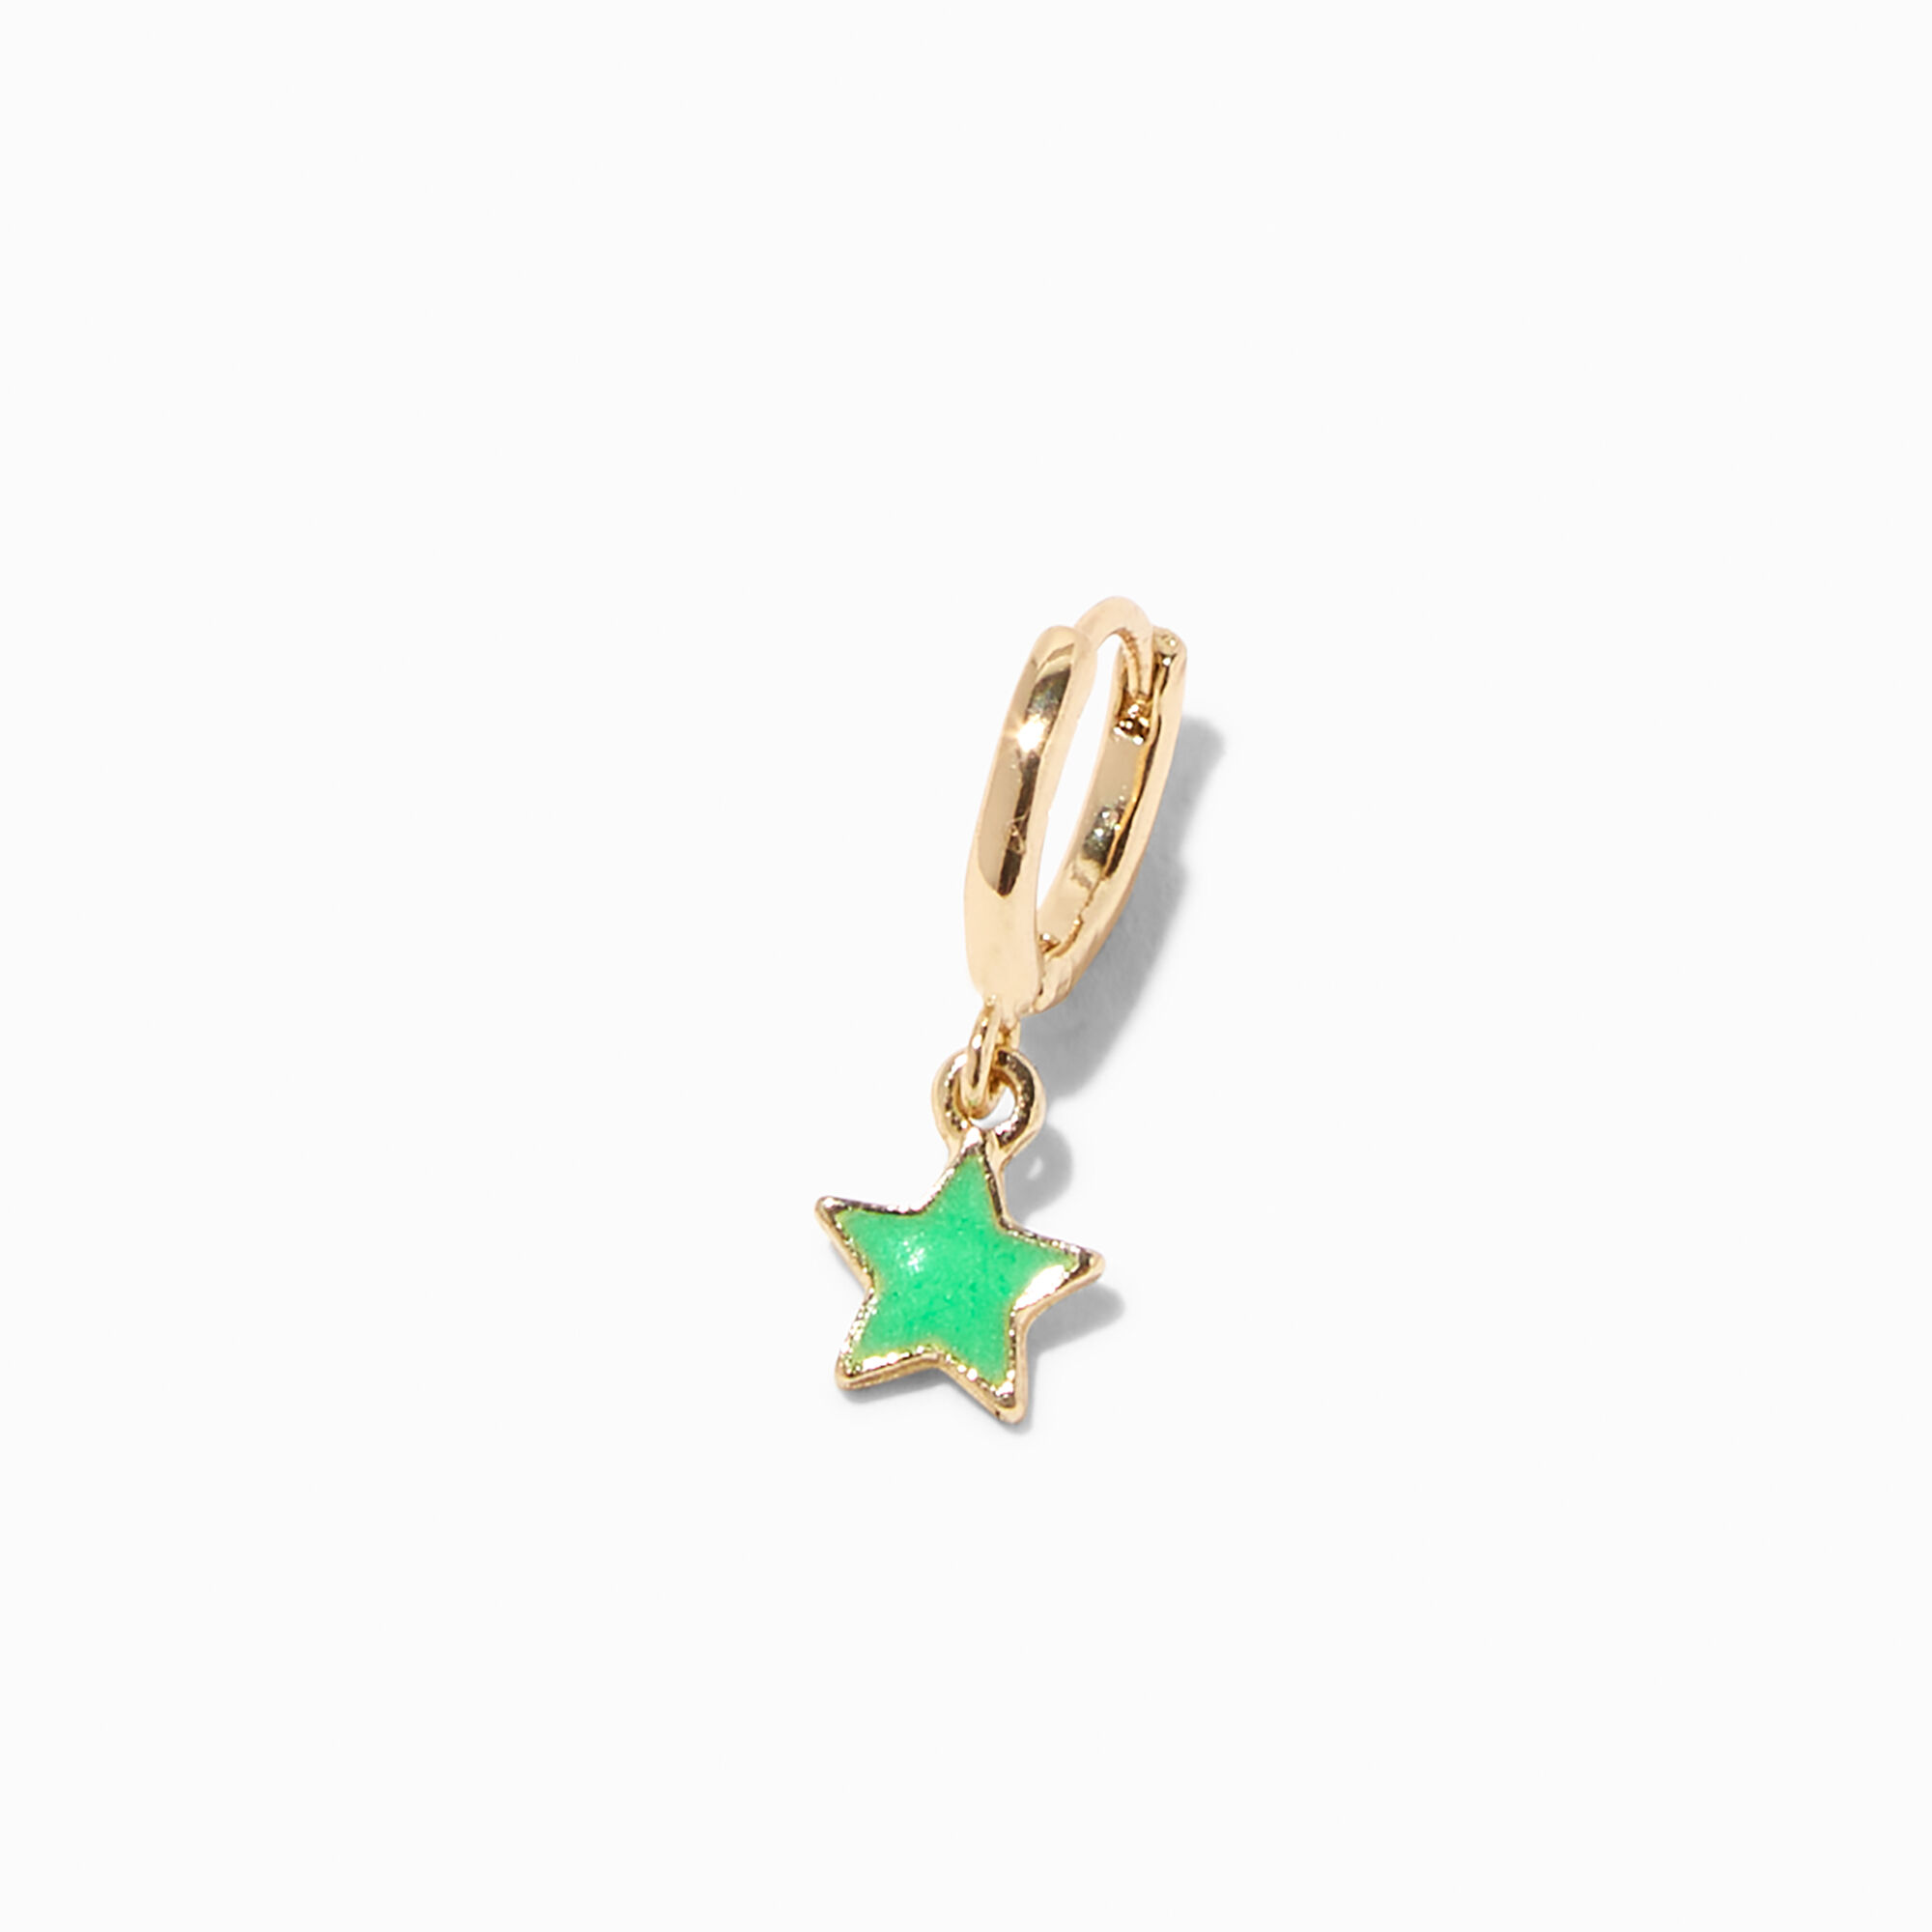 View Claires Glow In The Dark Star 16G GoldTone Cartilage Hoop Earring Green information